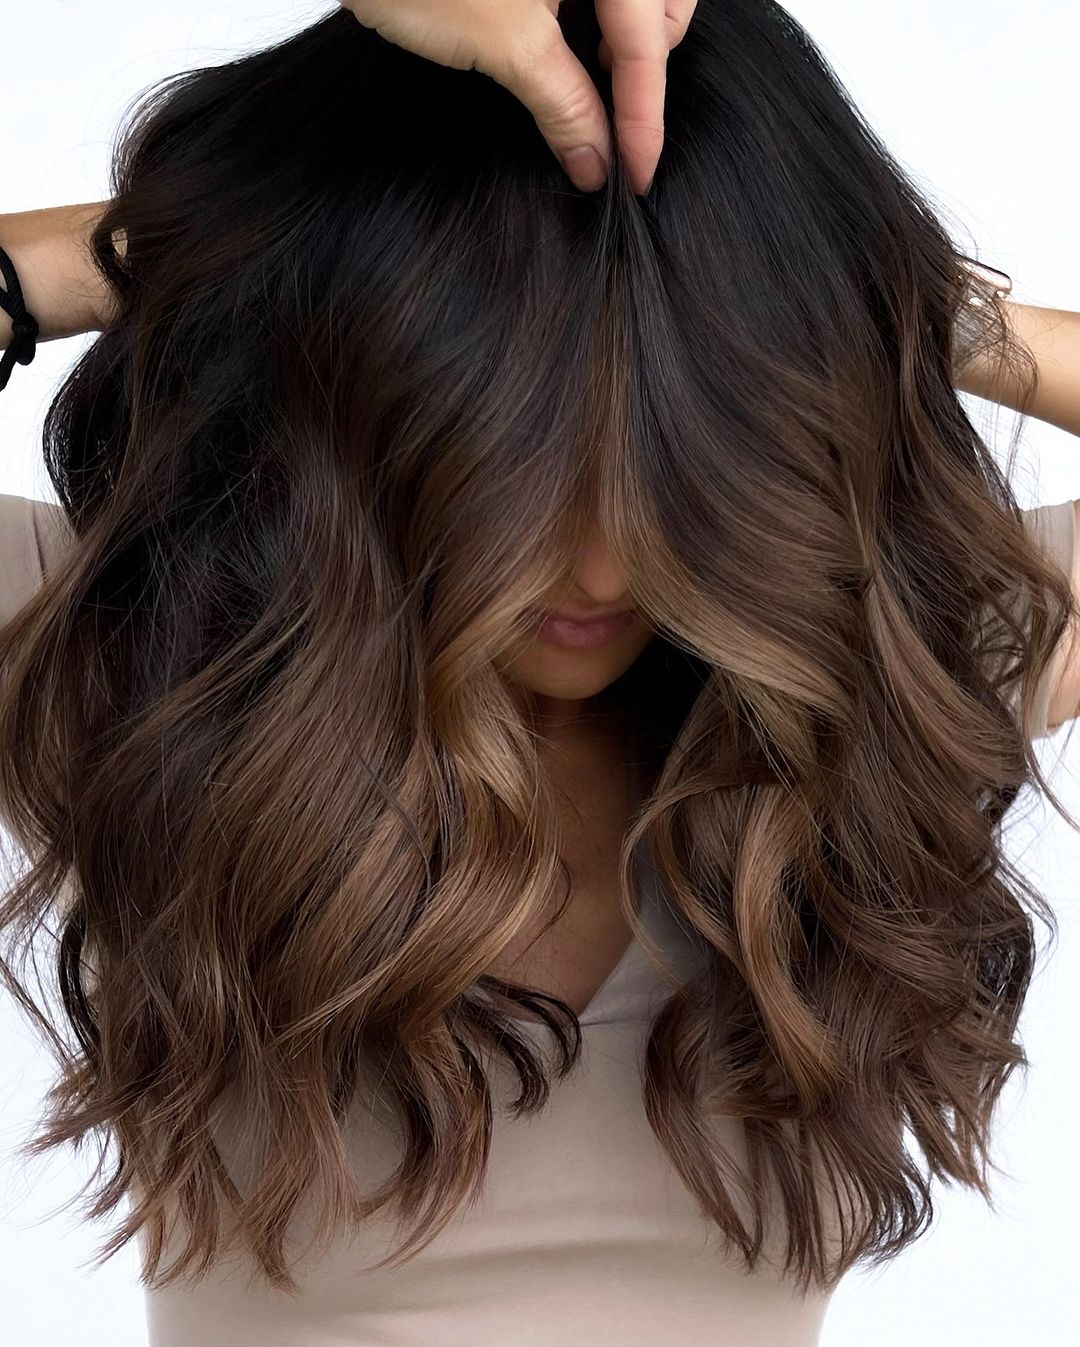 Wavy Chocolate Brown Hair With Light Caramel Highlights At The Front